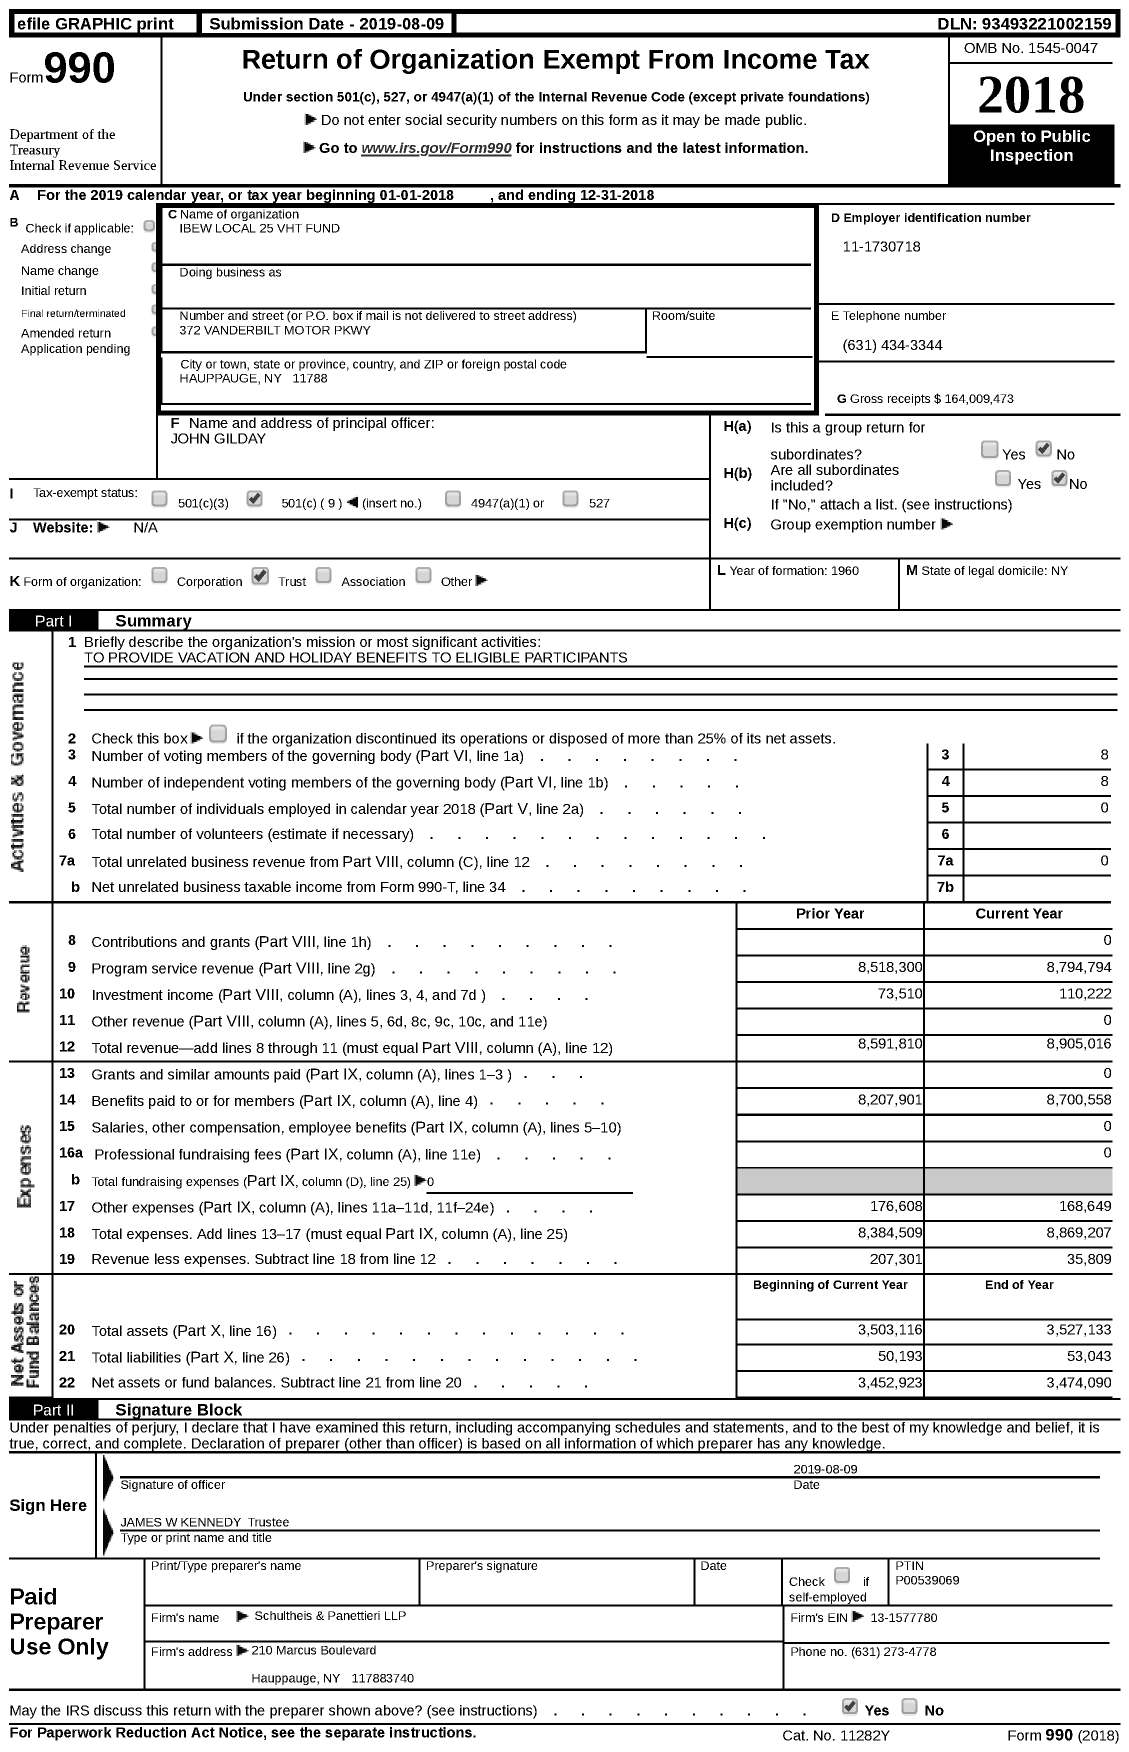 Image of first page of 2018 Form 990 for IBEW Local 25 VHT Fund